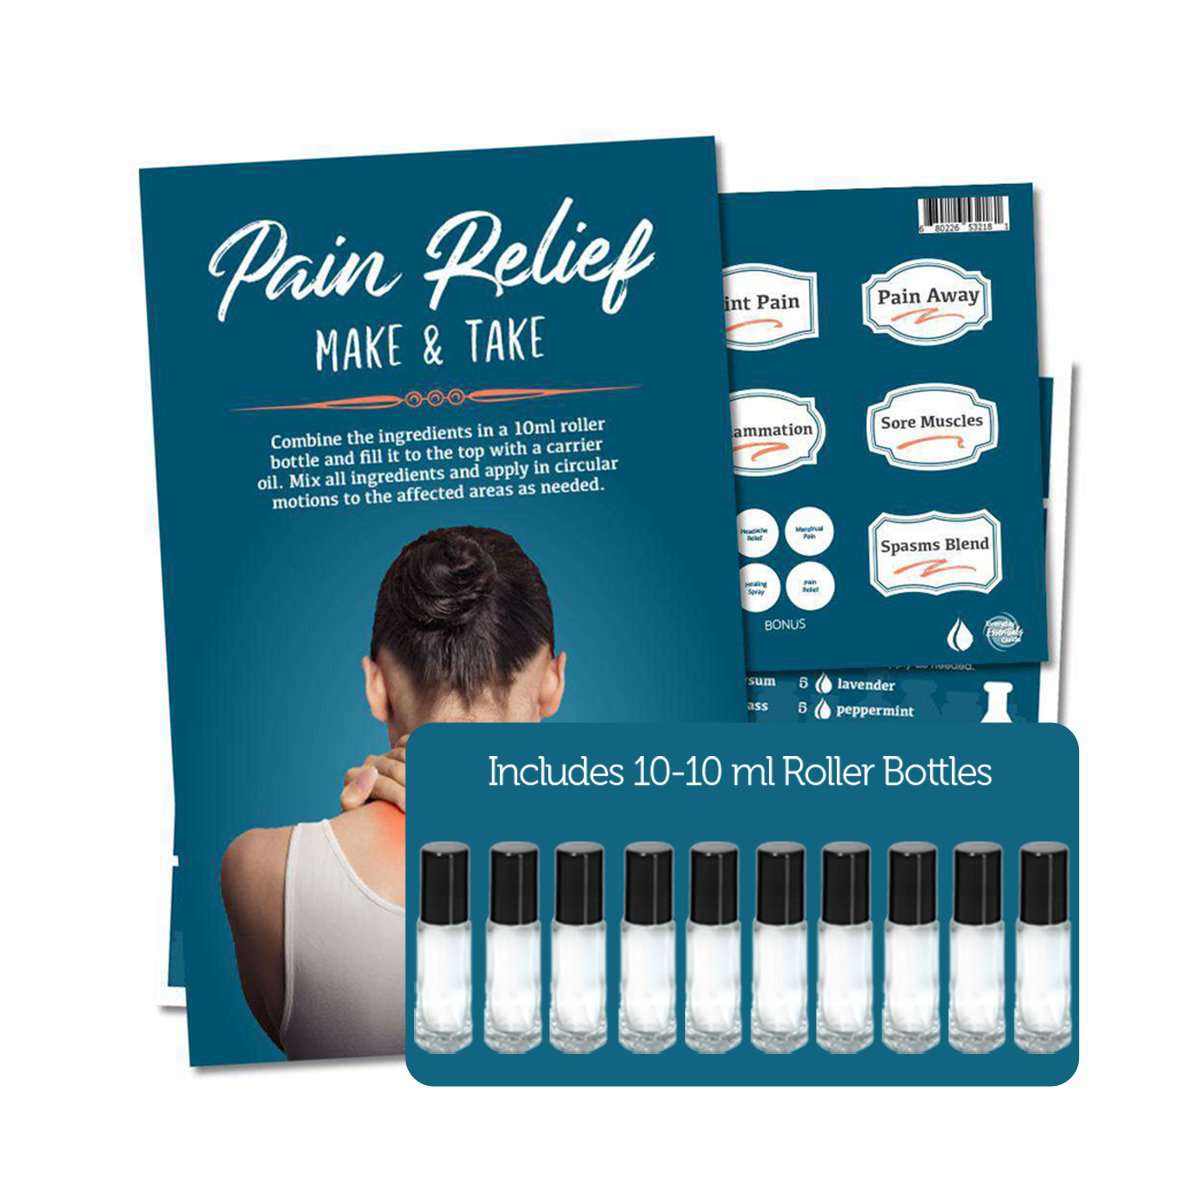 Pain Relief Recipes & Labels DIY Kit (Bottles Included)